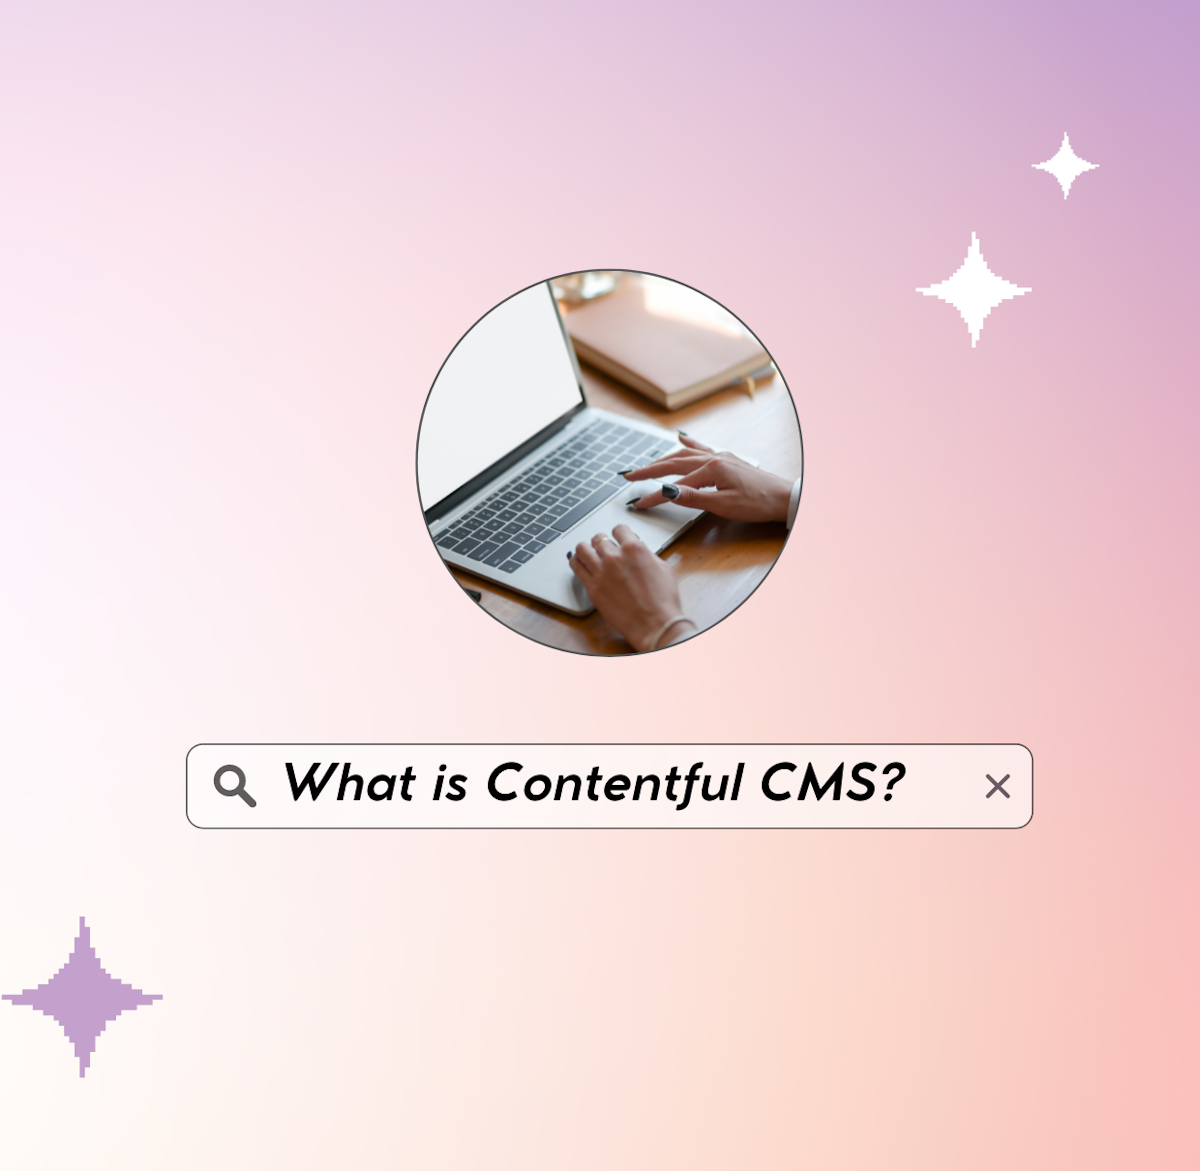 What is Contentful CMS